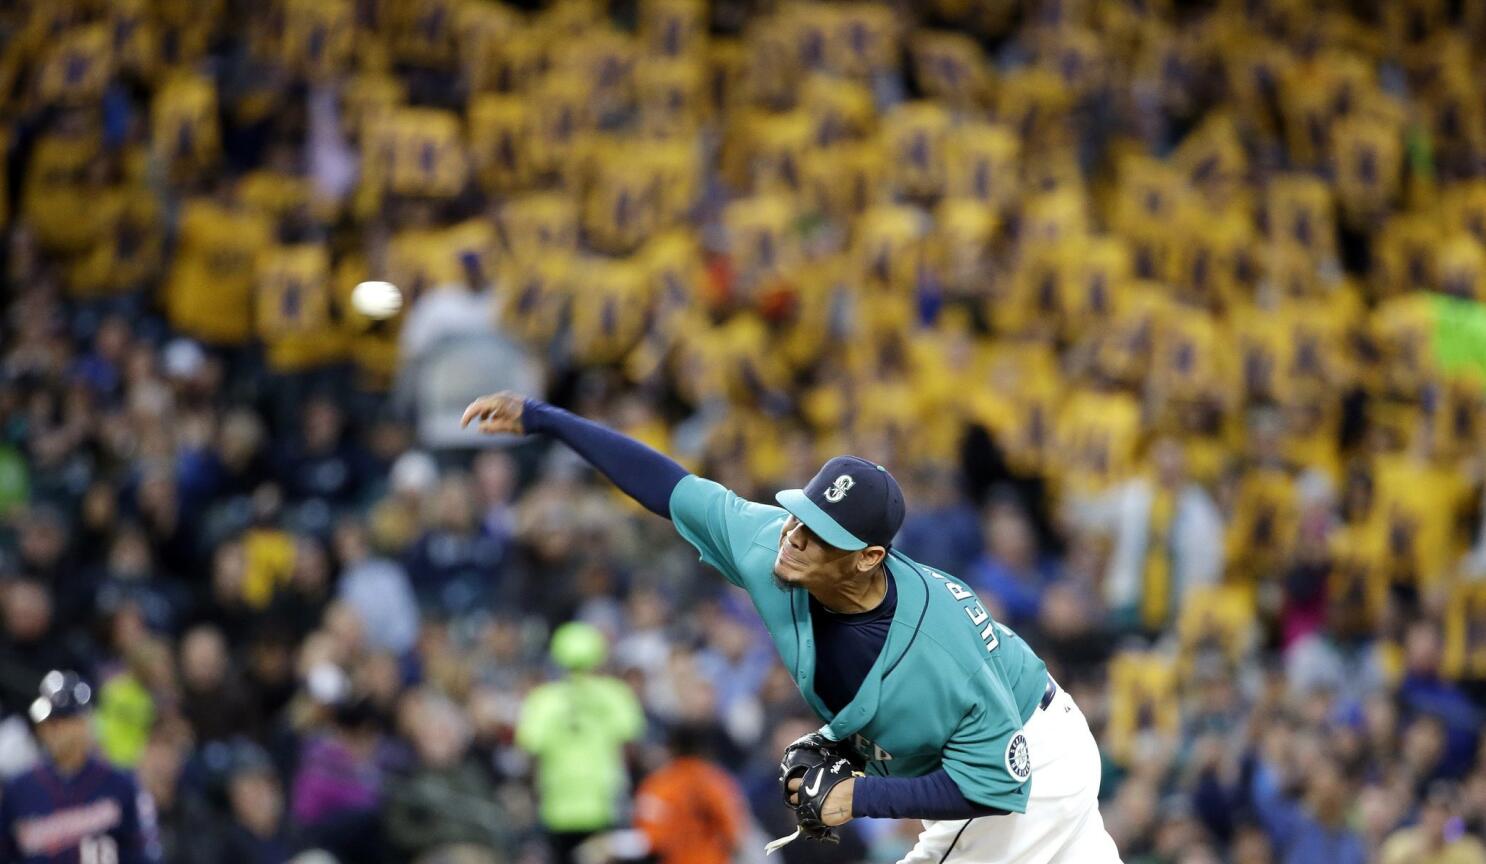 Nationals first to hit four home runs off Mariners' Felix Hernandez, 8-3  final in Safeco - Federal Baseball